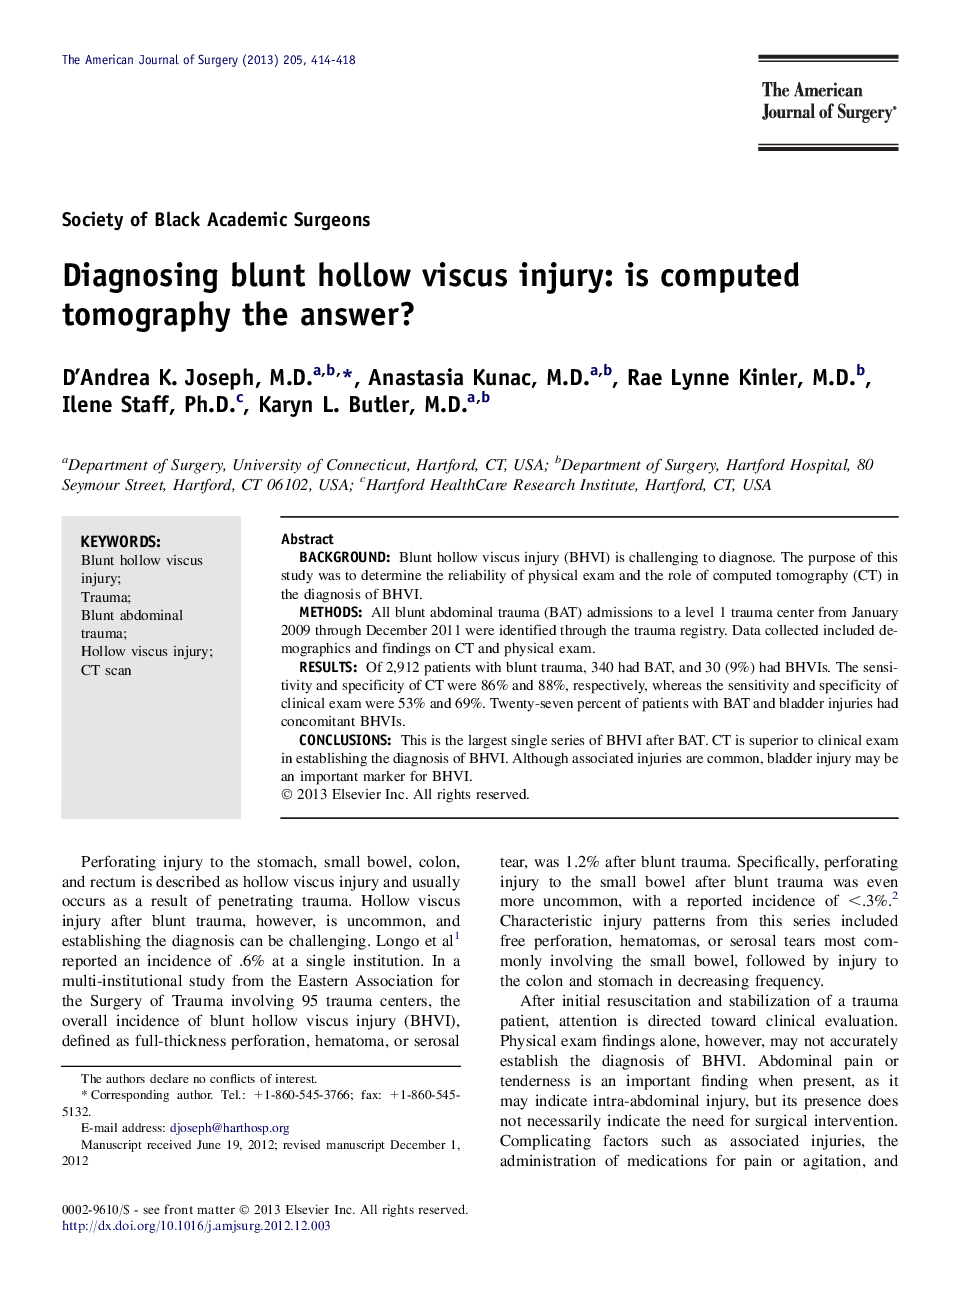 Diagnosing blunt hollow viscus injury: is computed tomography the answer? 